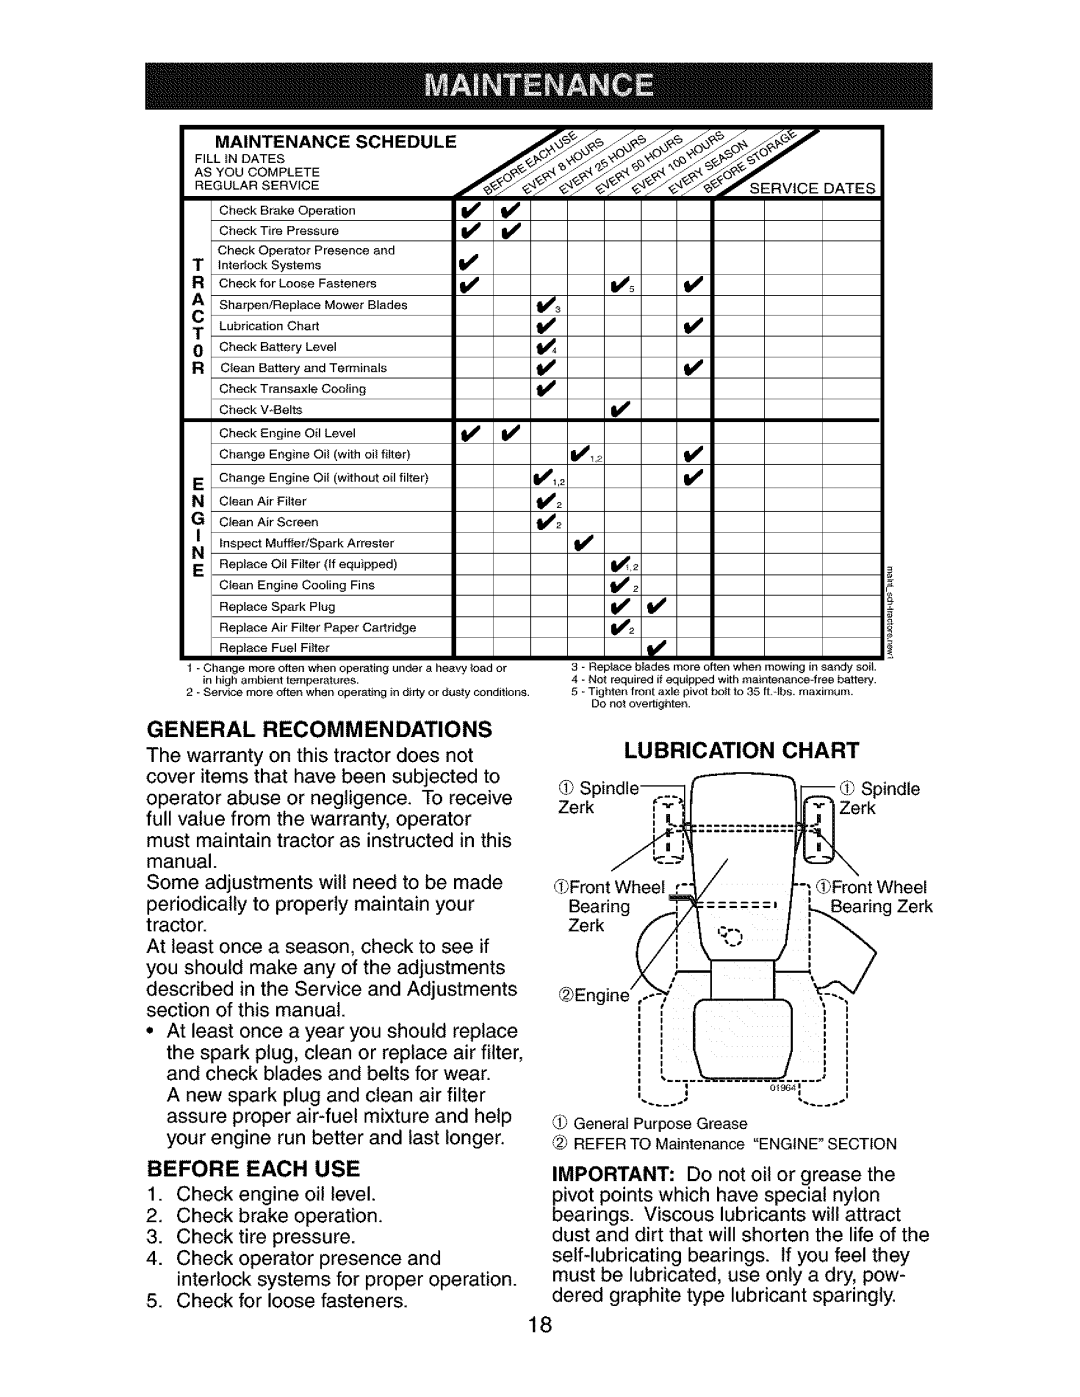 Craftsman 917.273401 owner manual General Recommendations, Before Each USE, Check tire pressure 